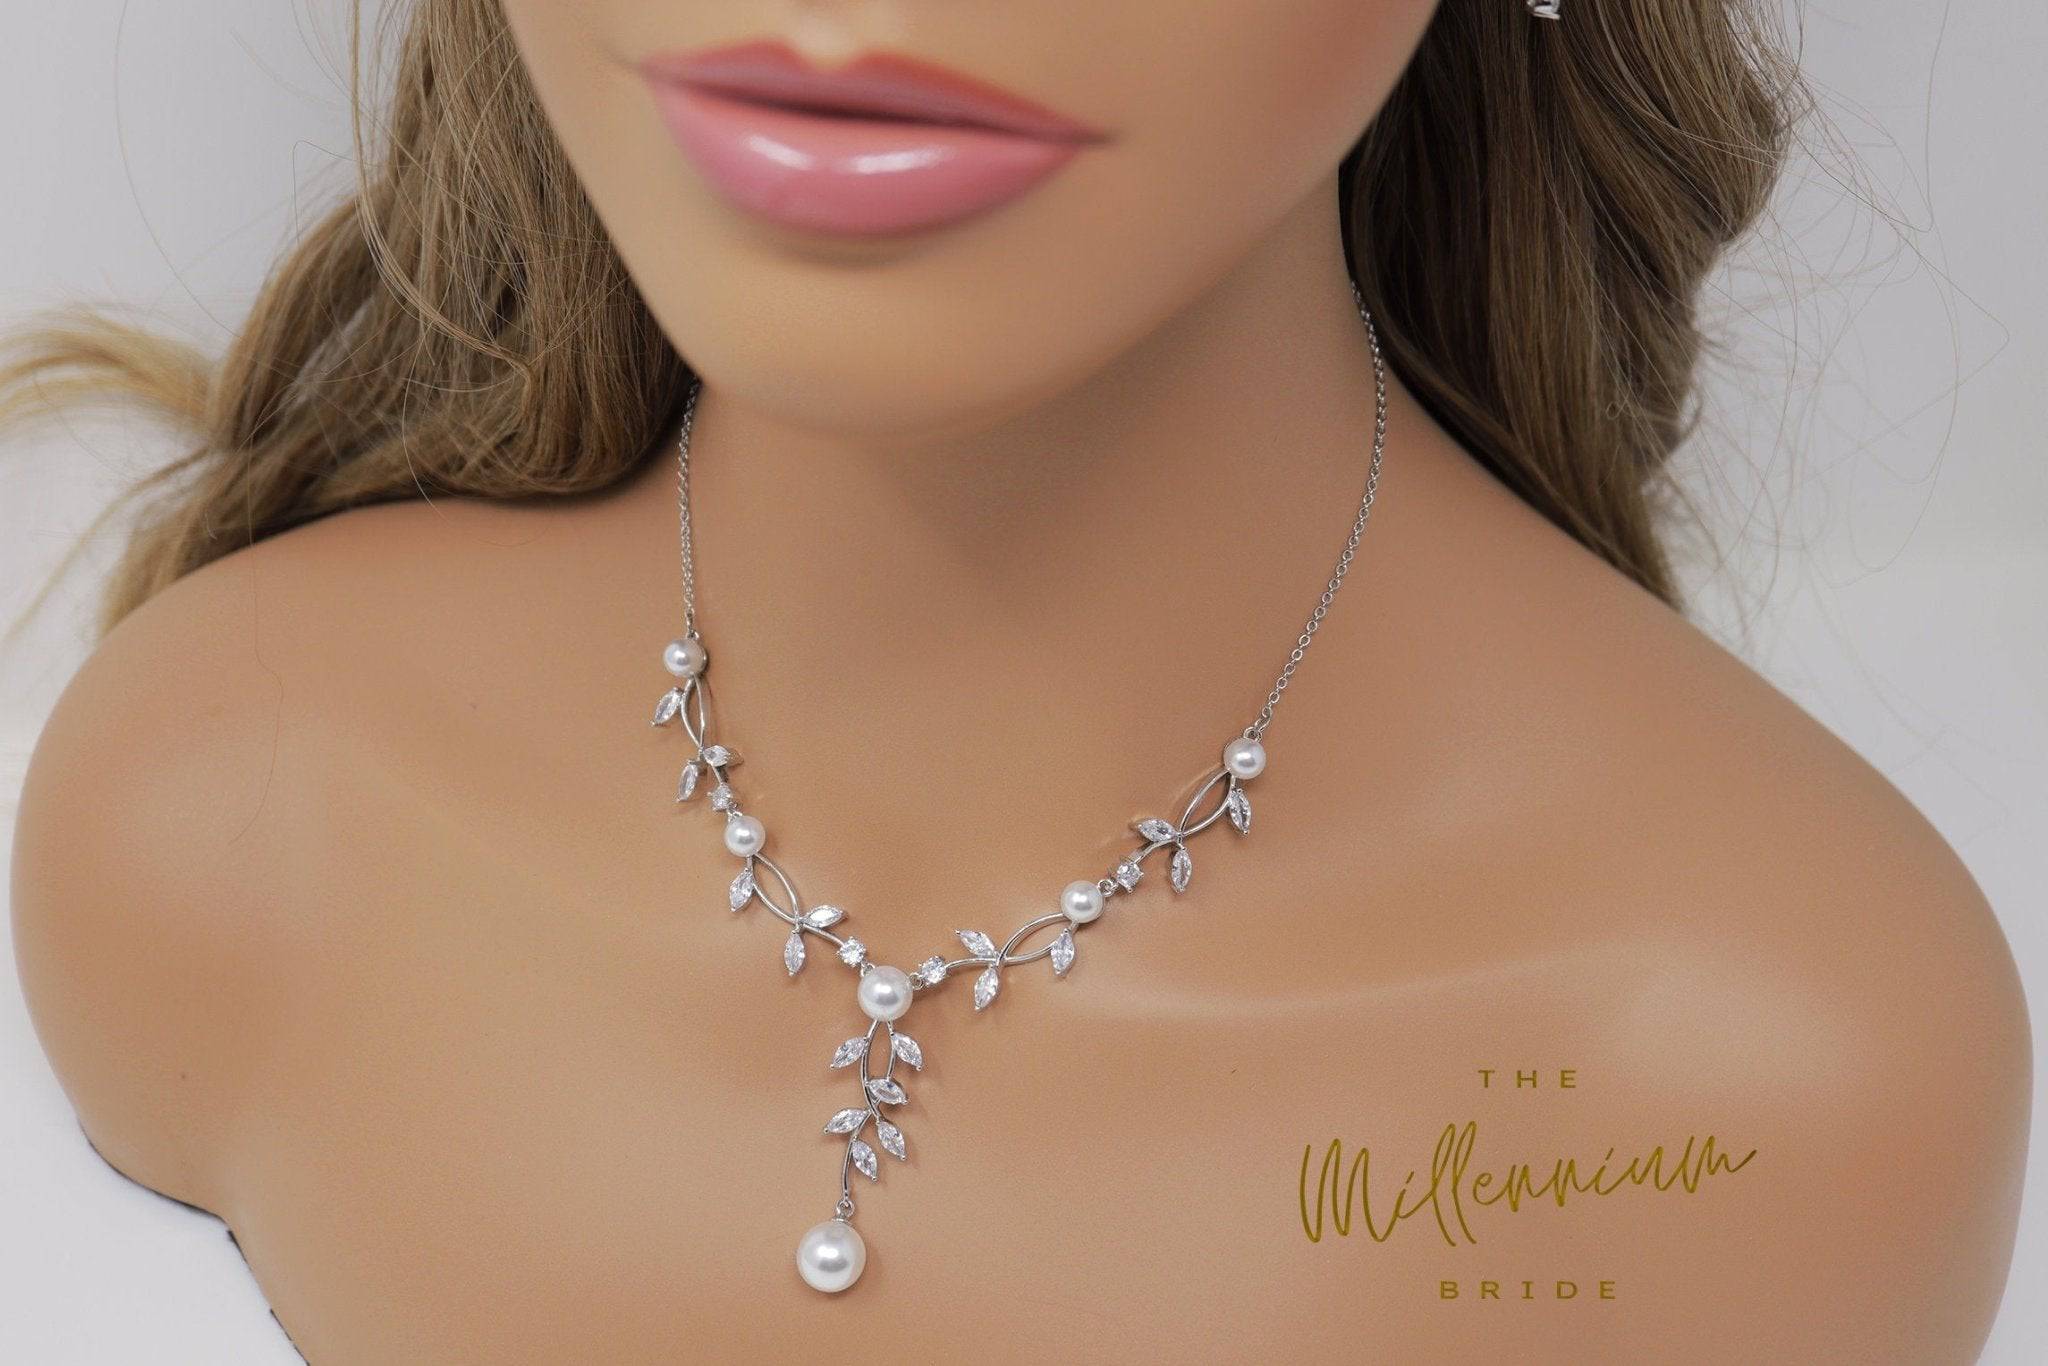 Details more than 146 swarovski pearl necklace and earrings best